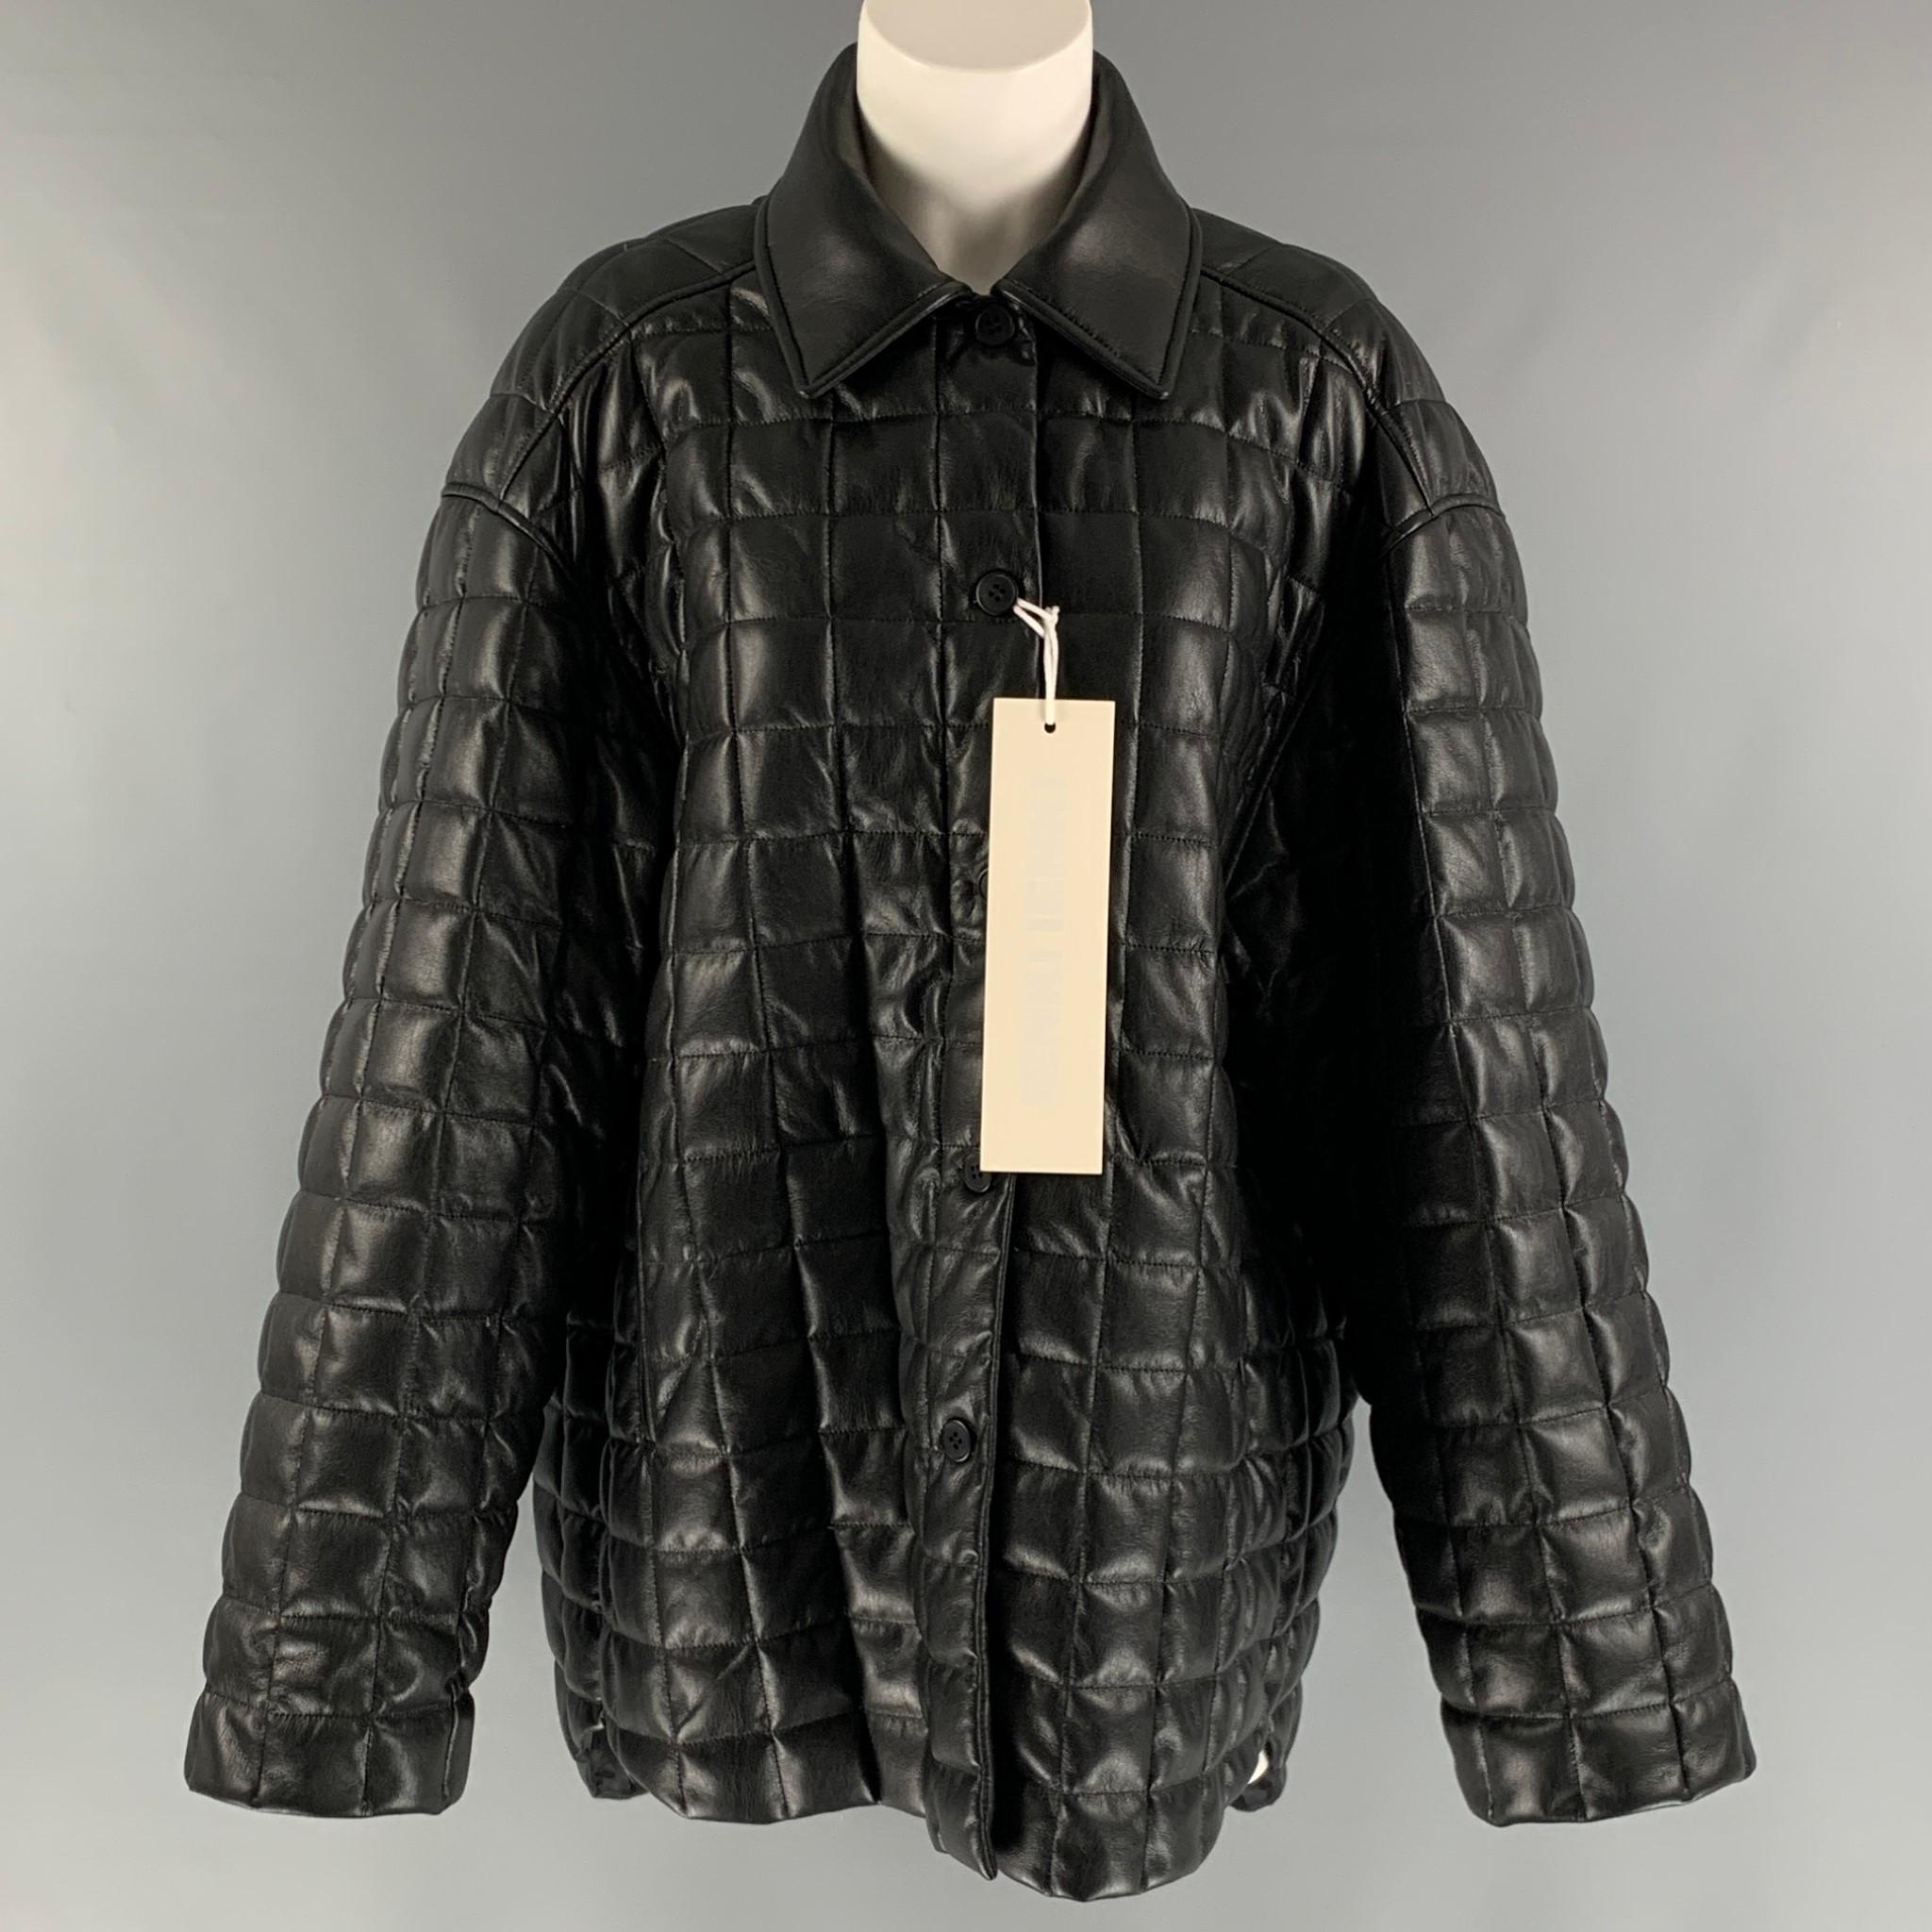 IENKI IENKI 'KALIK DOWN SHIRT w.Tote' Quilted Jacket comes in black polyester blend material featuring an oversized fit, classic shirt shape, side pockets, and button closure. Comes with Tote bag.

New with Tags.
Marked: M

Measurements:

Shoulder: